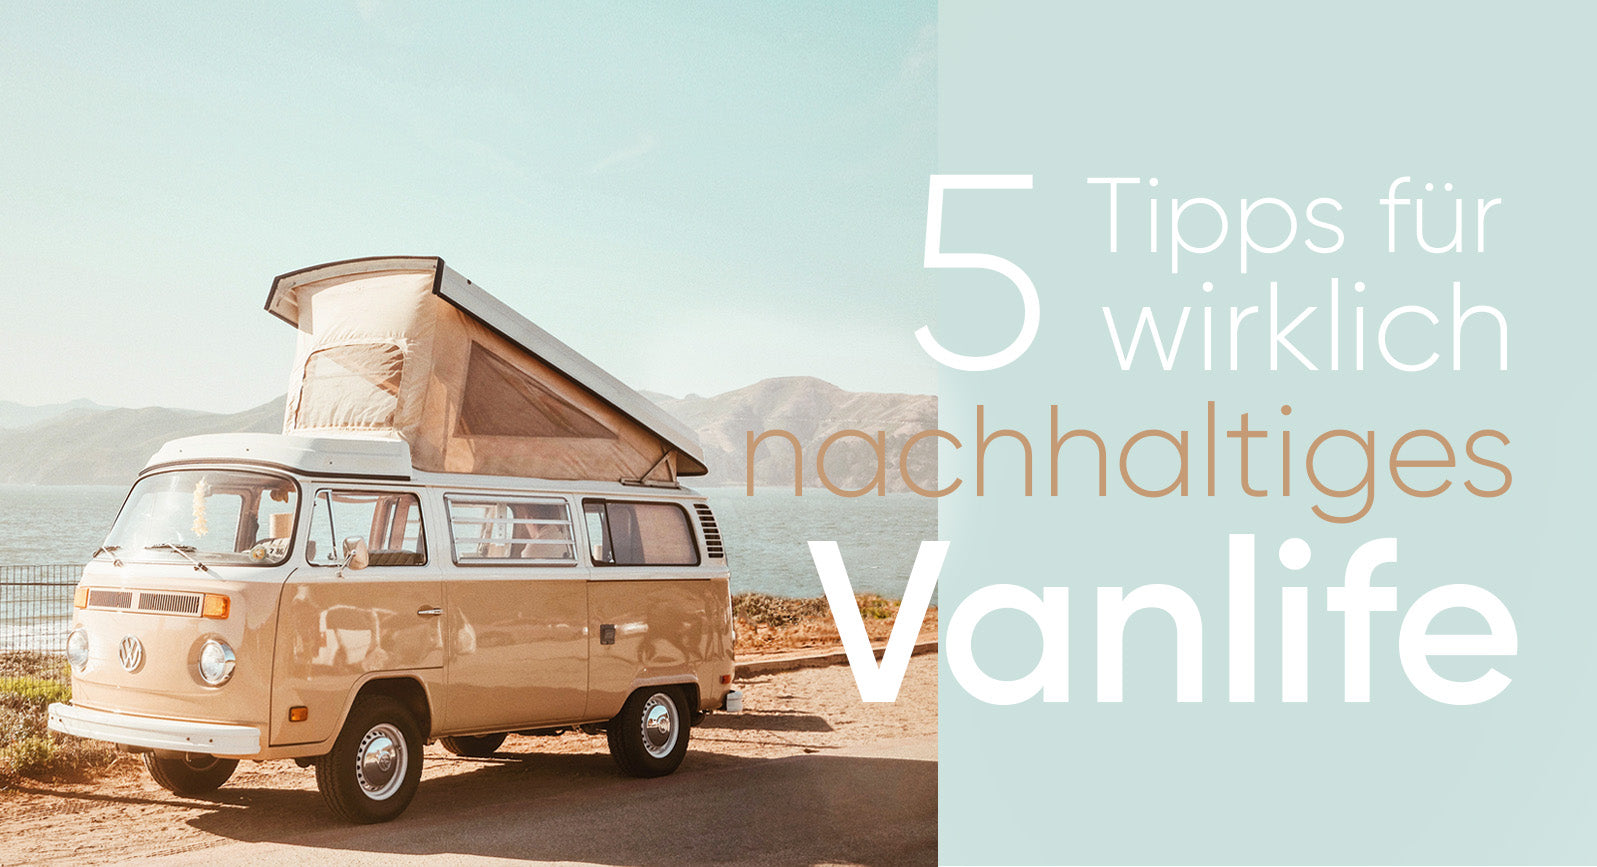 Feel the Nature. Save the Nature. – 5 Tipps für wirklich nachhaltiges Camping & Vanlife.Feel the Nature. Save the Nature. –